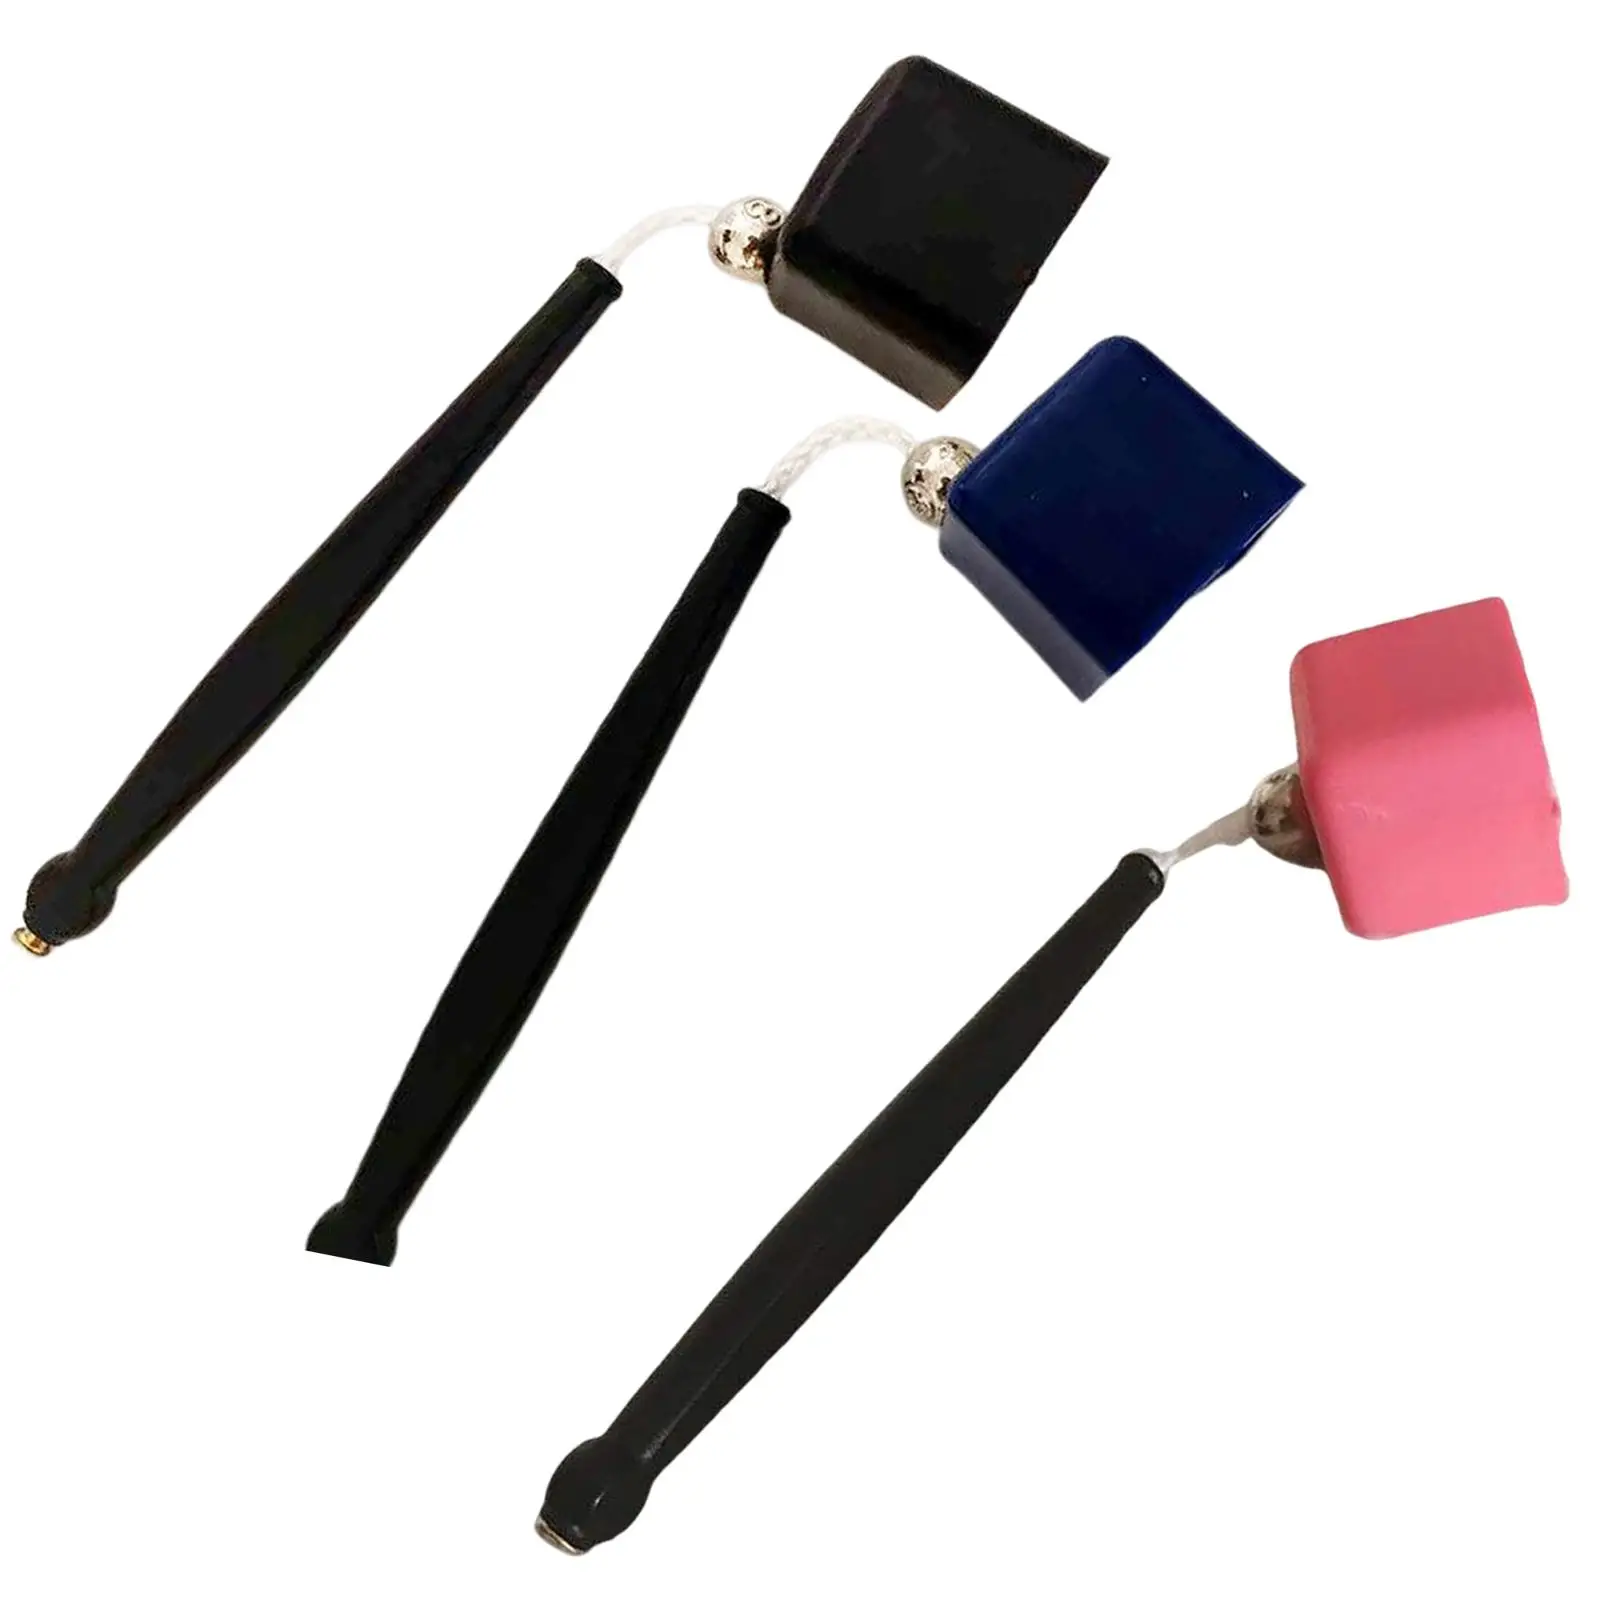 Billiards Pool Cue Chalk Holder Cue Tips Billiard Replacement Cue Chalk Hang